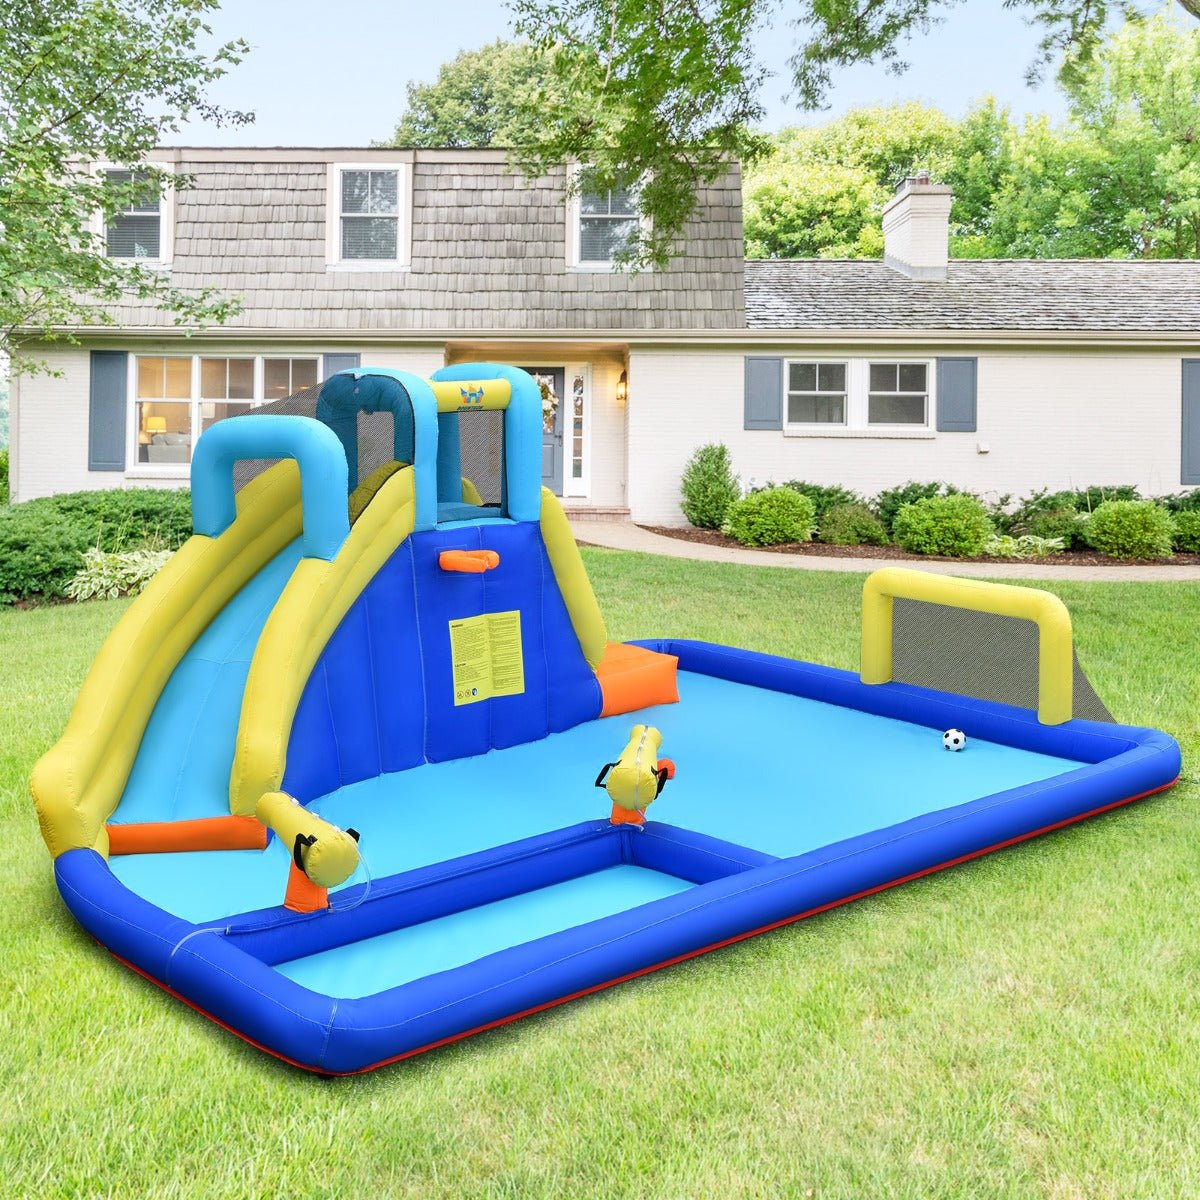 Outdoor Water Jumping Castle - Slide and Sprayers for Splashy Fun